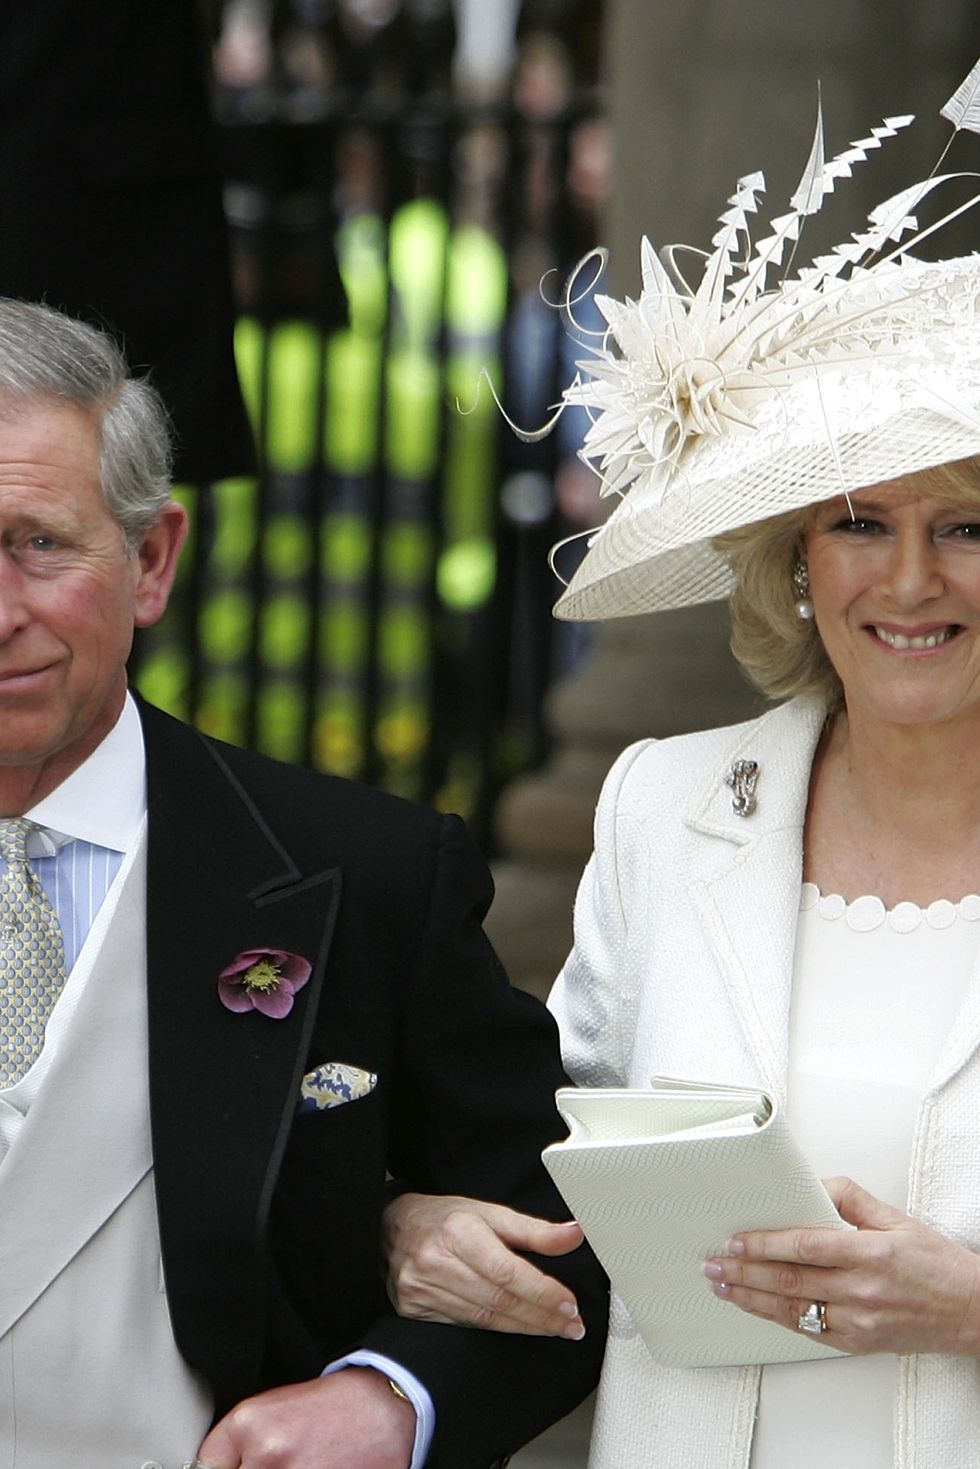 hrh prince charles mrs camilla parker bowles marry at guildhall civil cer